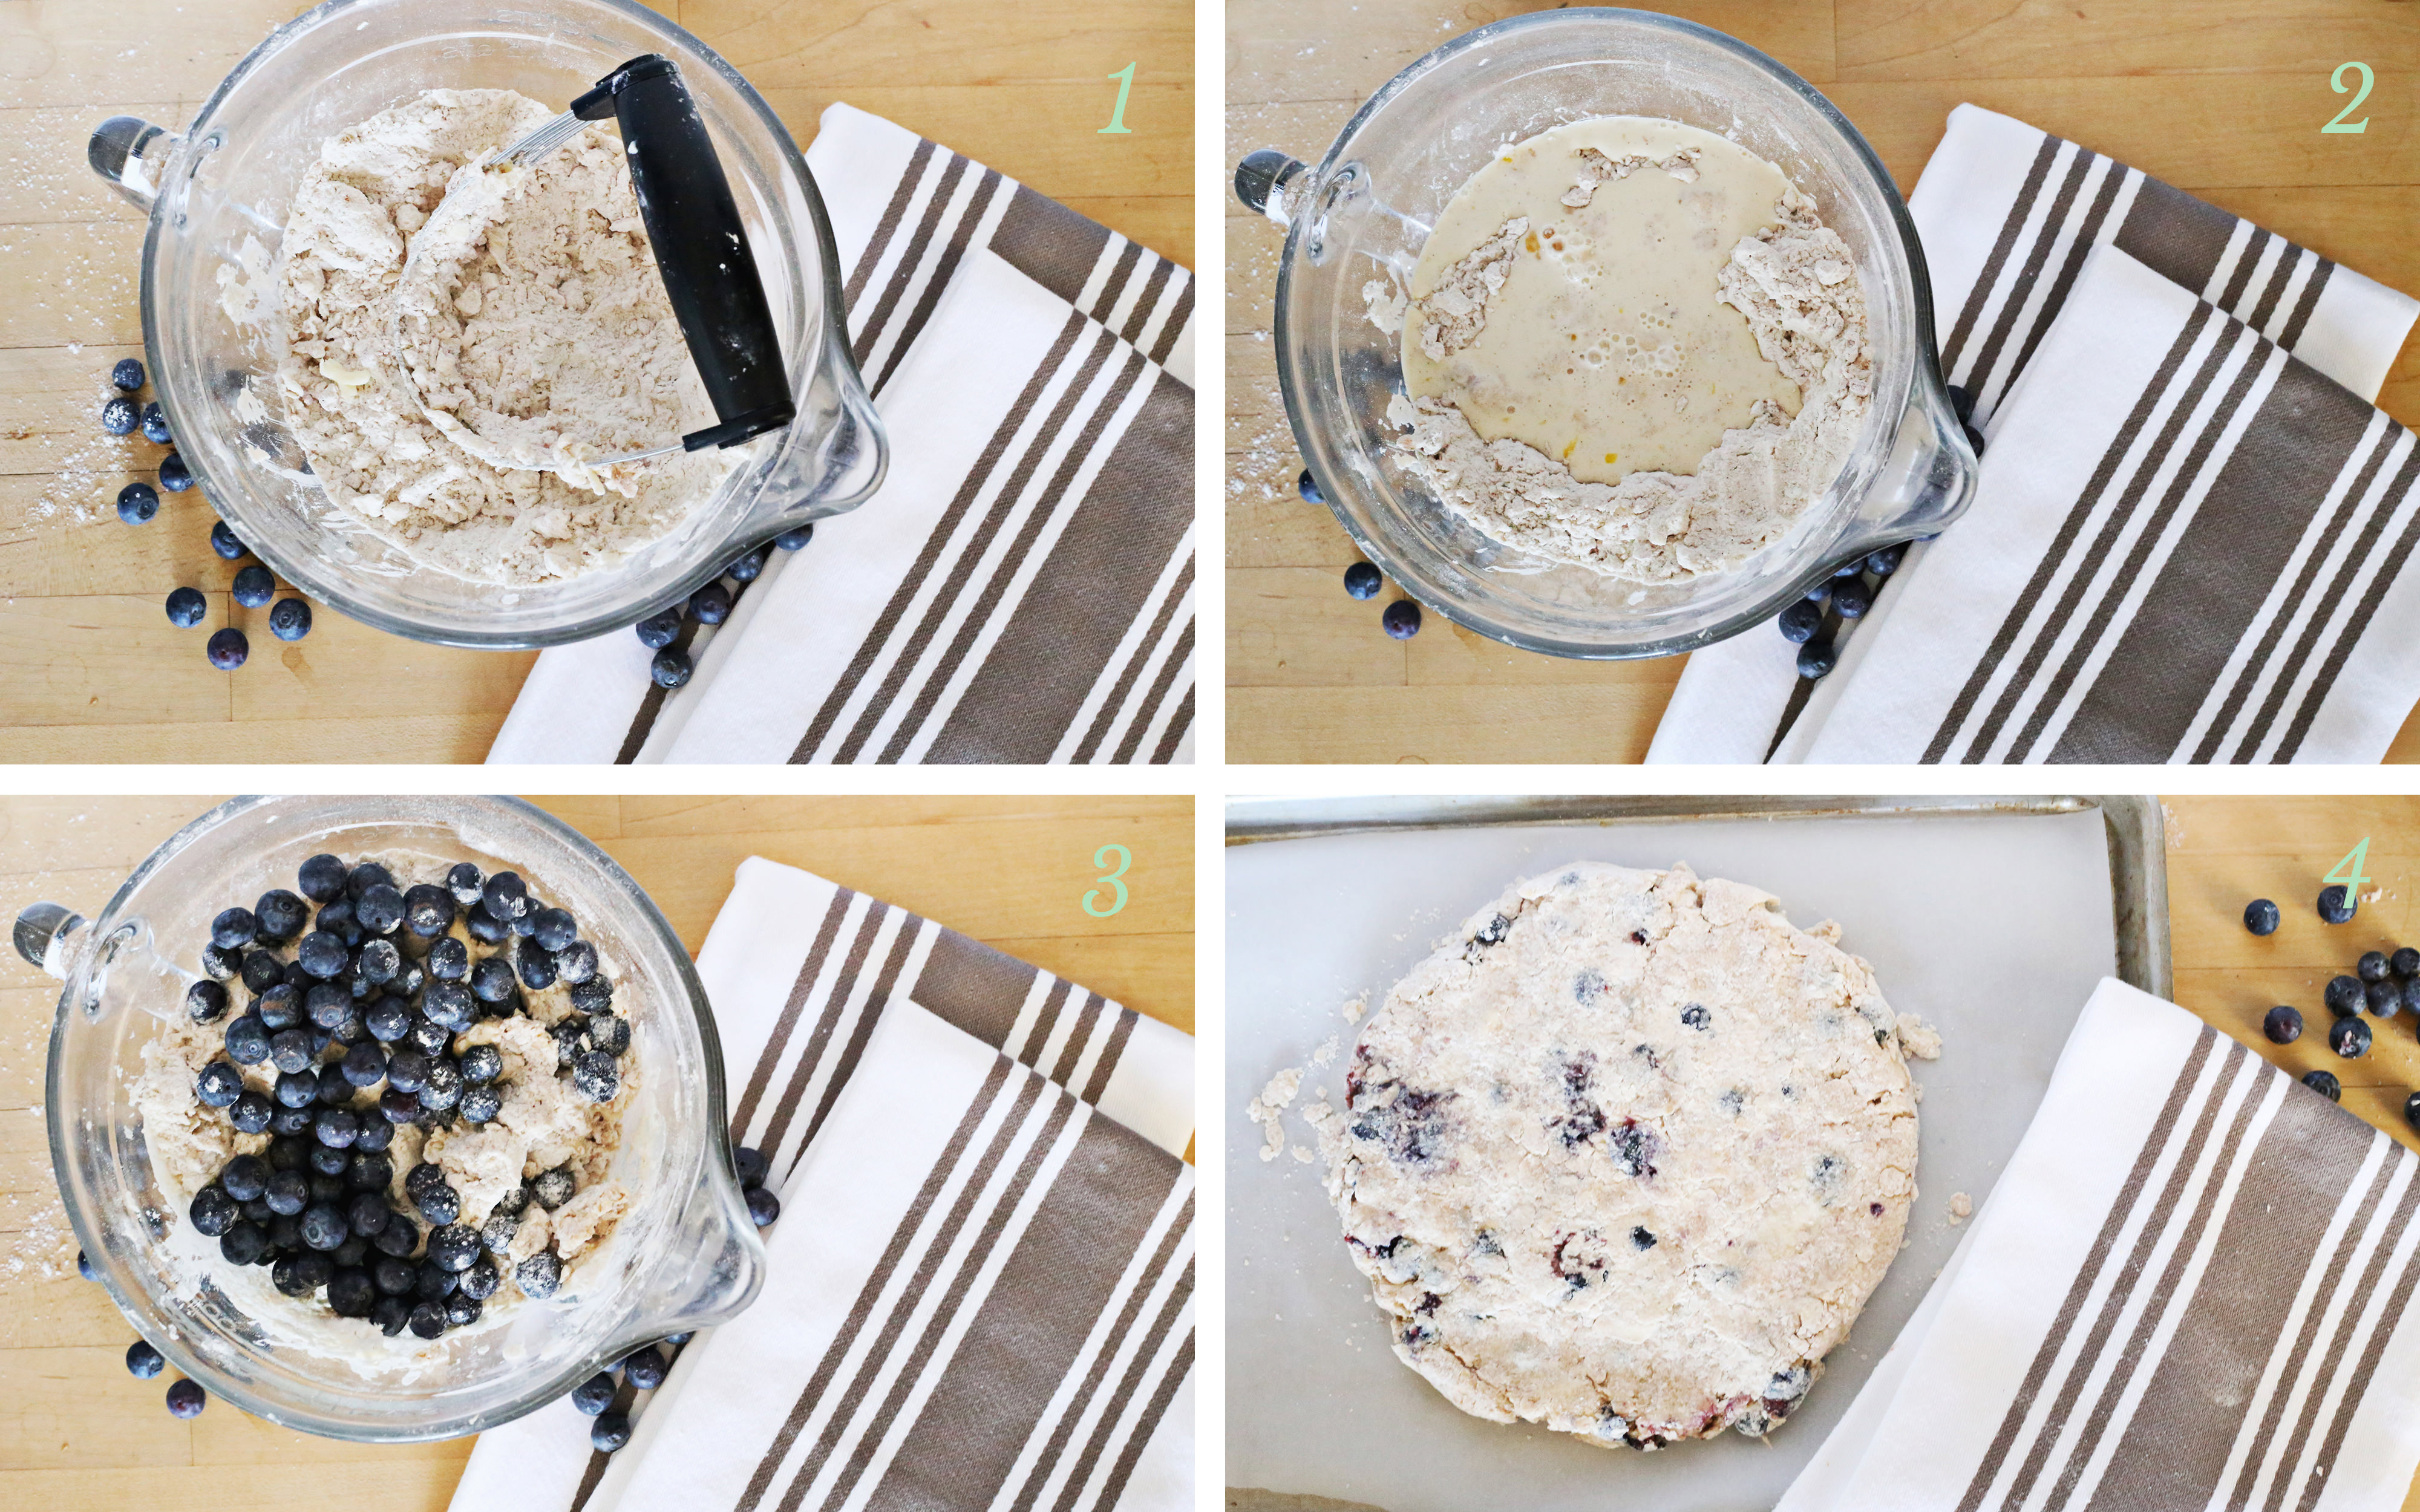 These delicious blueberry scones take only a few simple steps and they'll be ready for tea time!